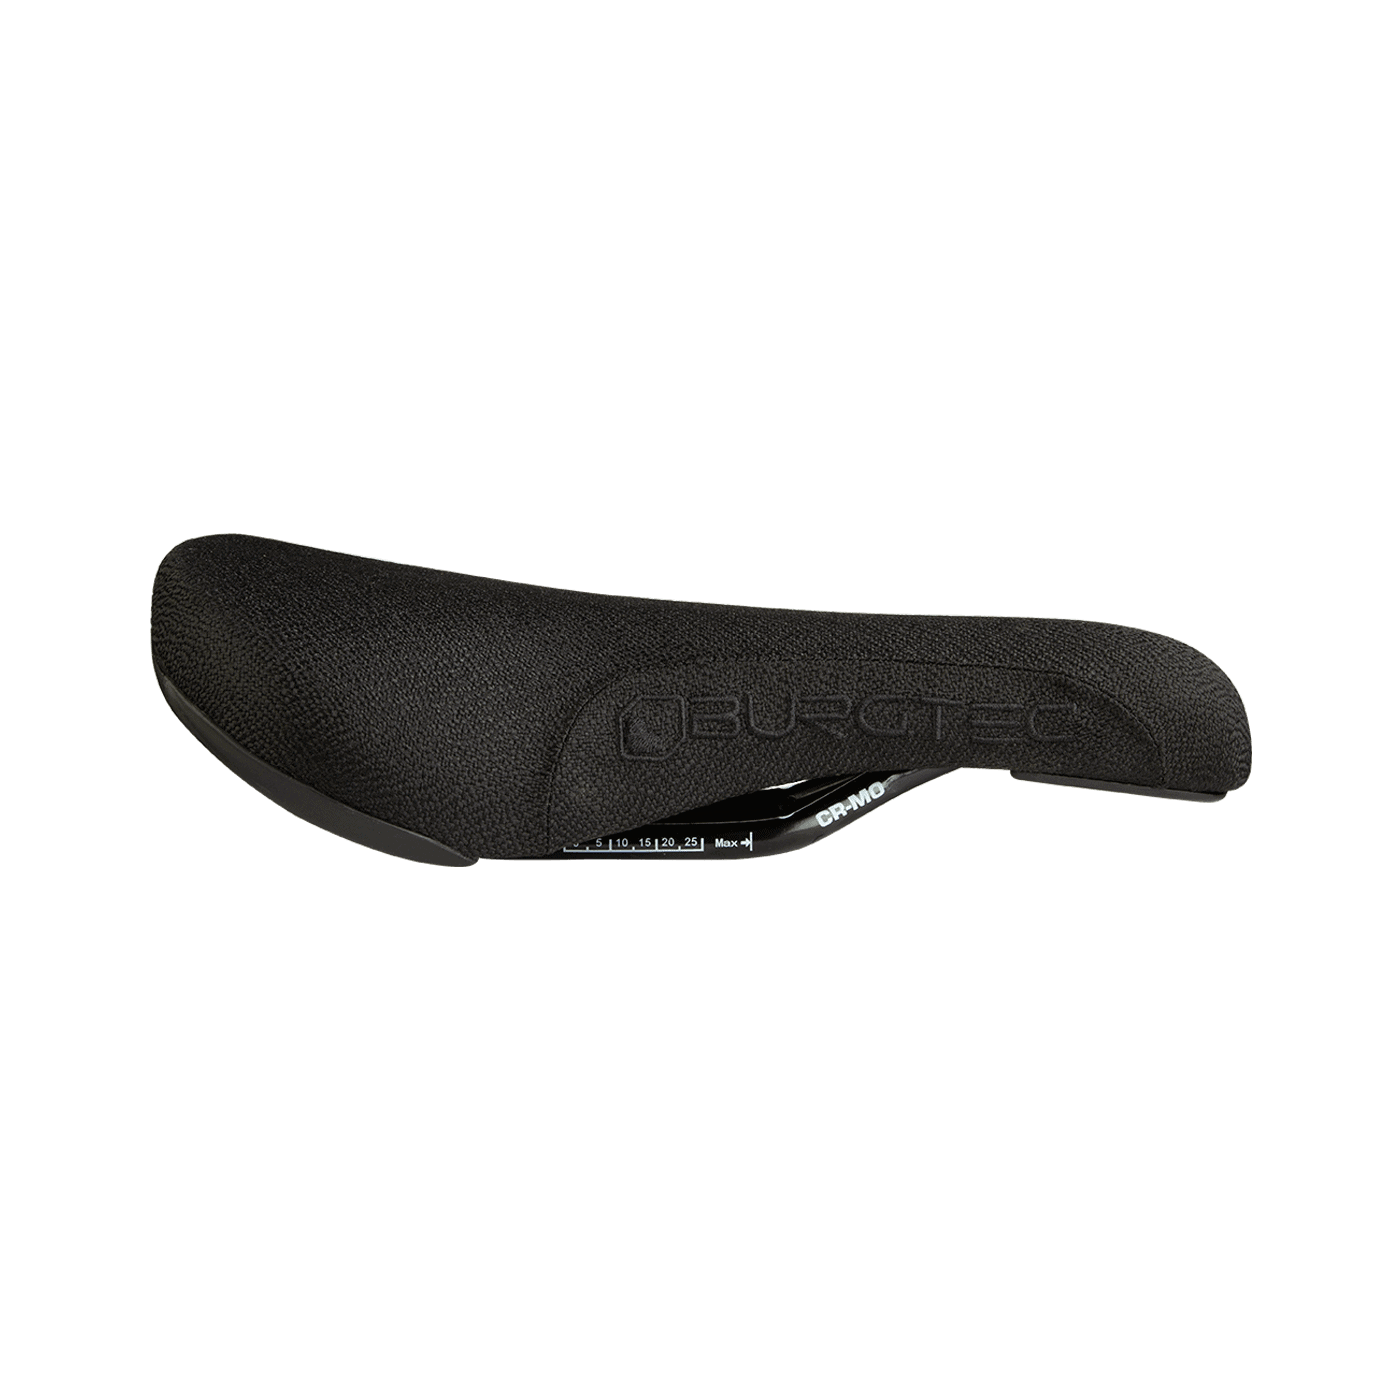 Black Burgtec the cloud boost saddle with black logo on the side